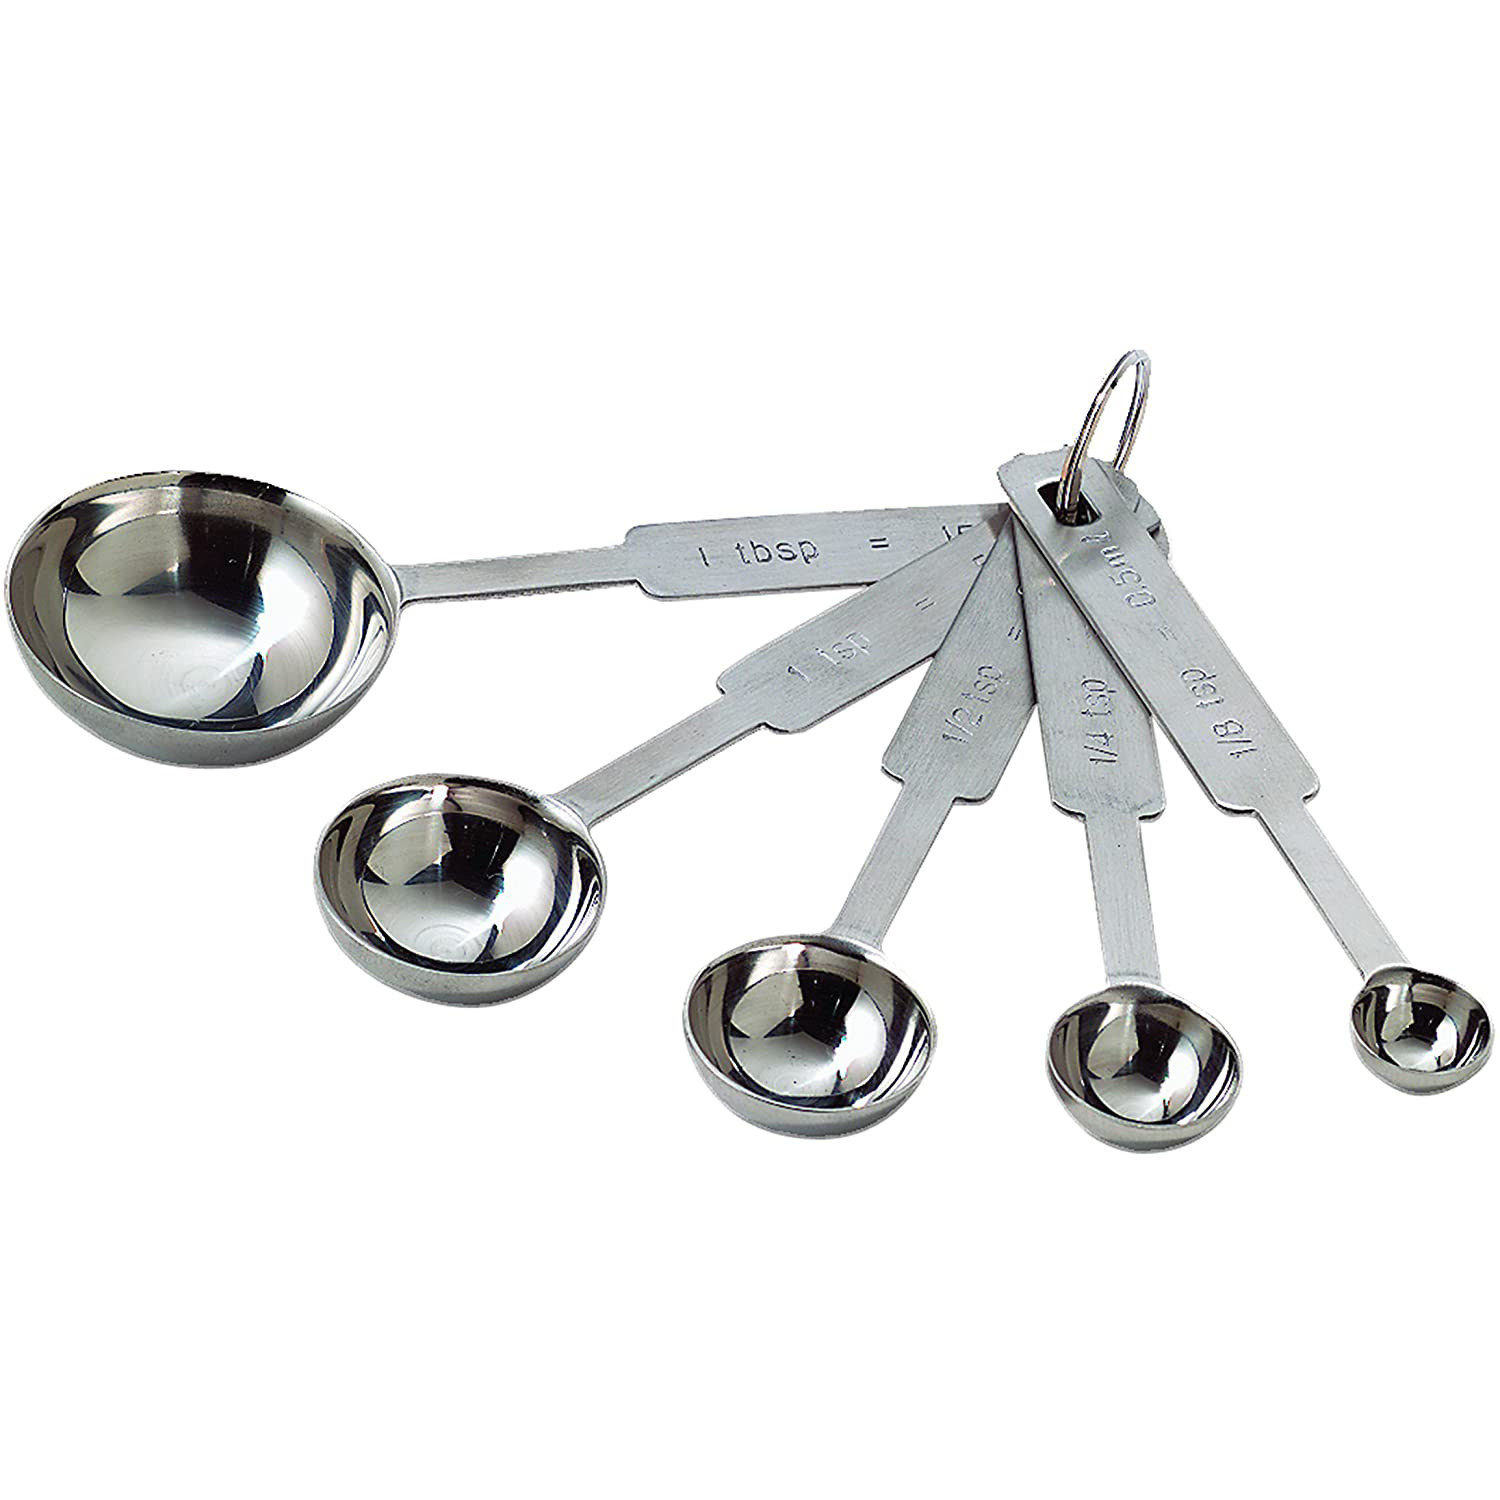 Amco Stainless Steel Measuring Spoons, Set of 4 